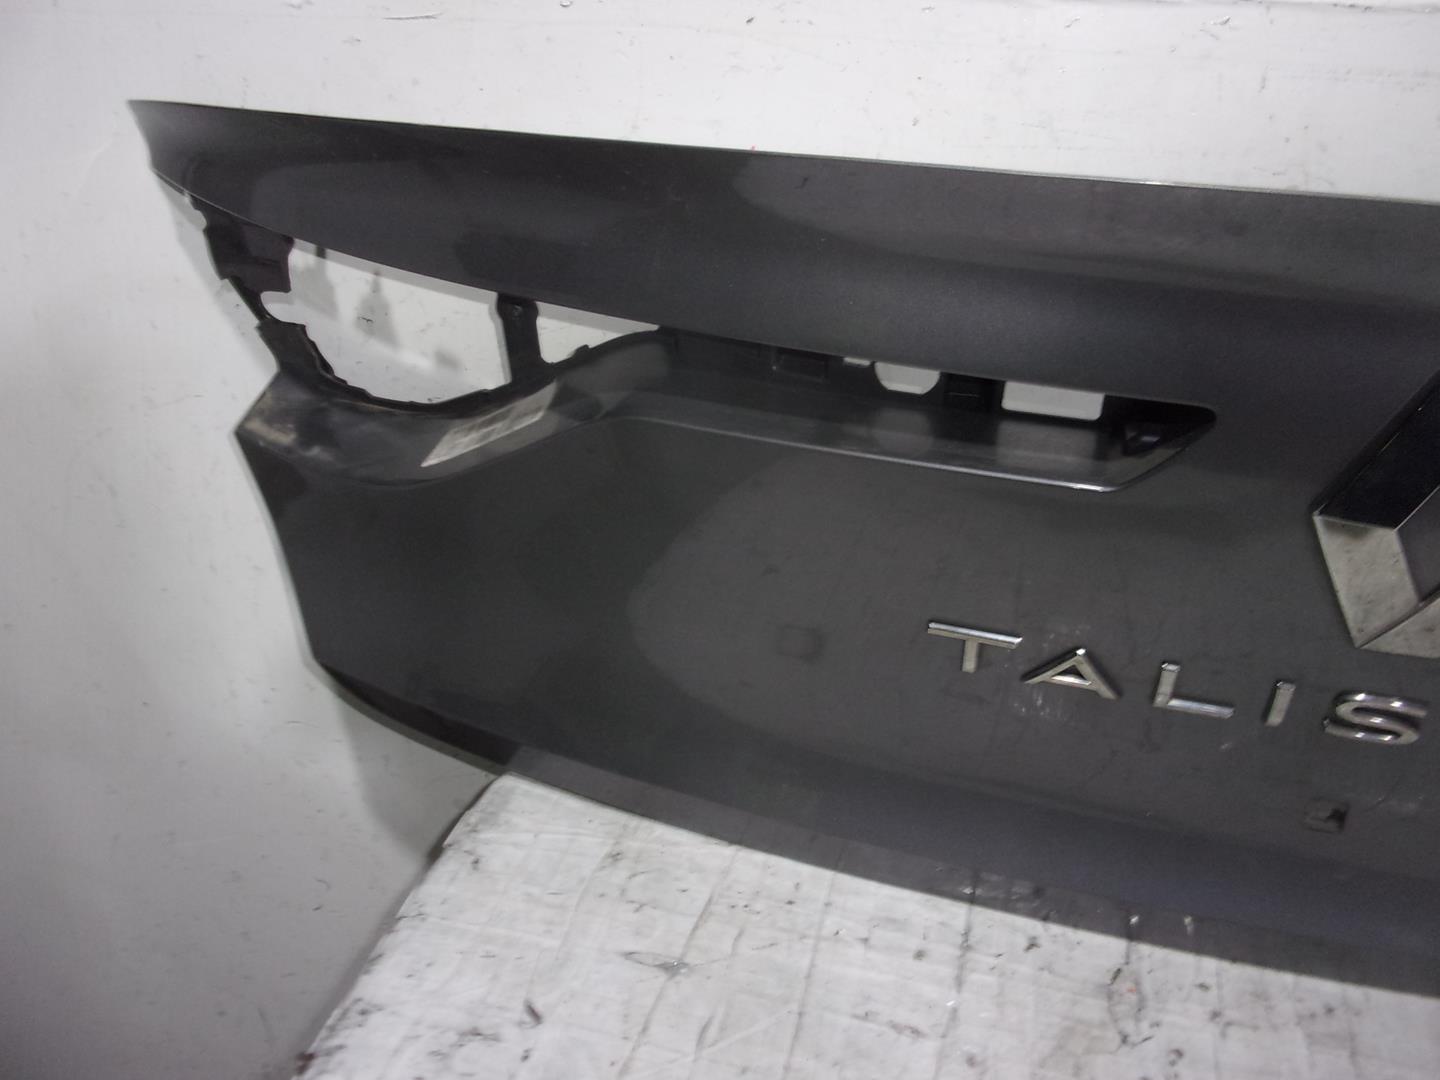 RENAULT W210 (1995-2002) Bootlid Rear Boot 903726438R, GRISOSCURO, 4PUERTAS 24550827